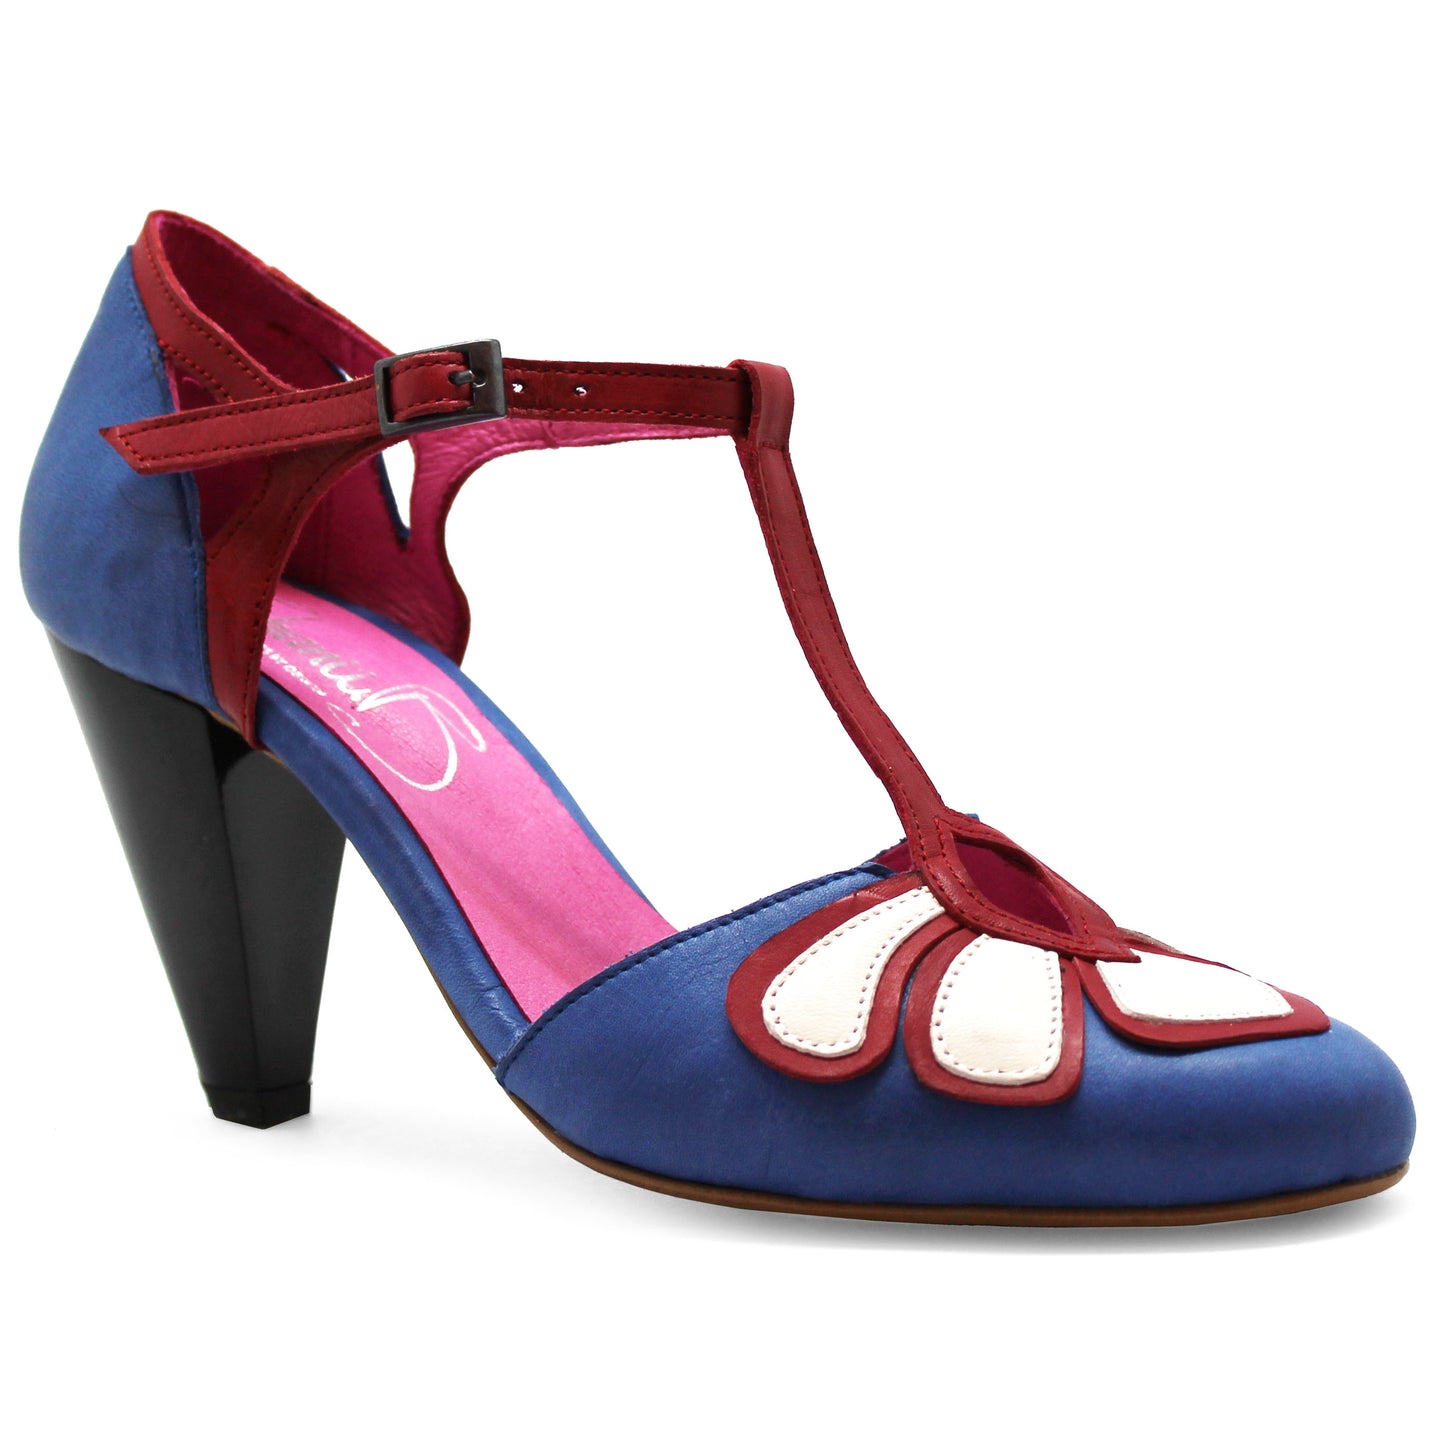 Petal - Blue, Red and White t strap shoe